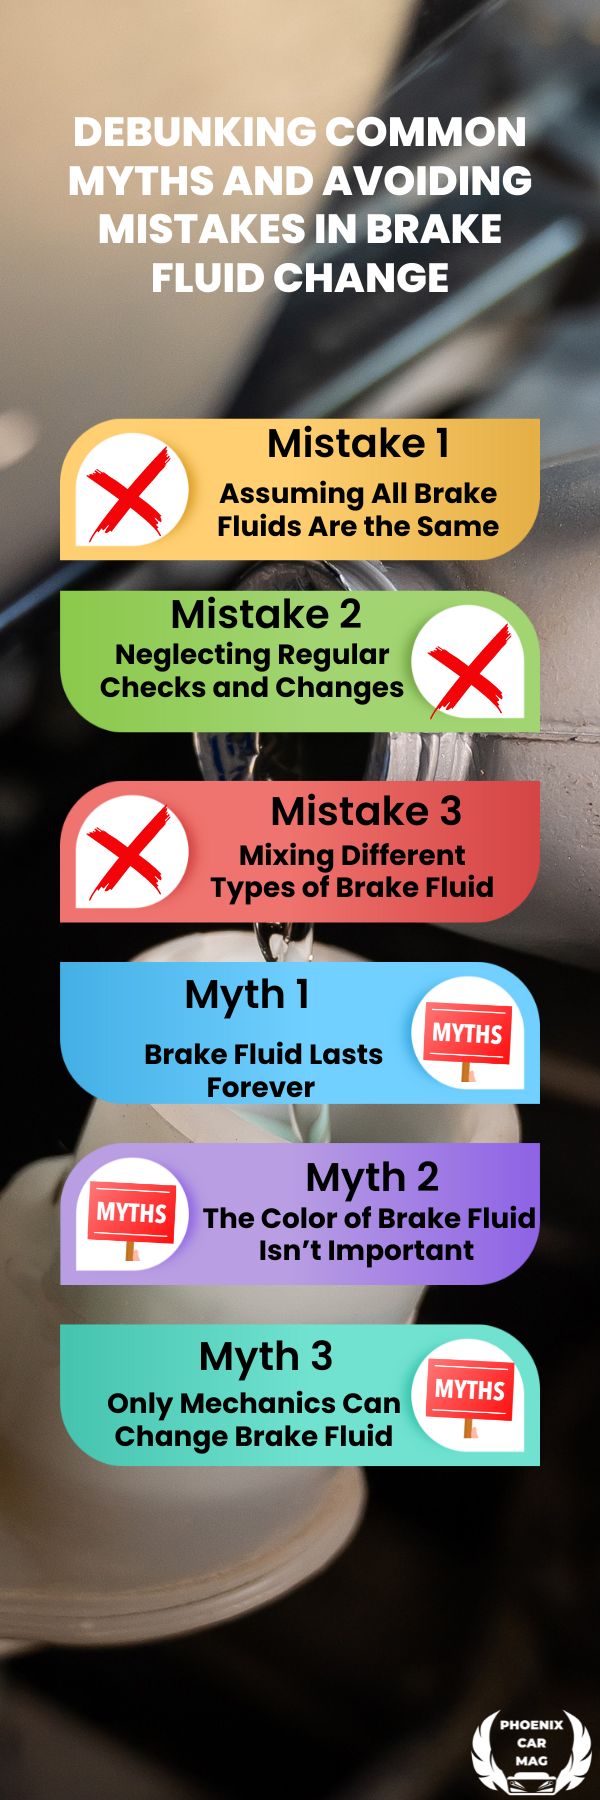 an infographic for Debunking Common Myths and Avoiding Mistakes in Brake Fluid Change